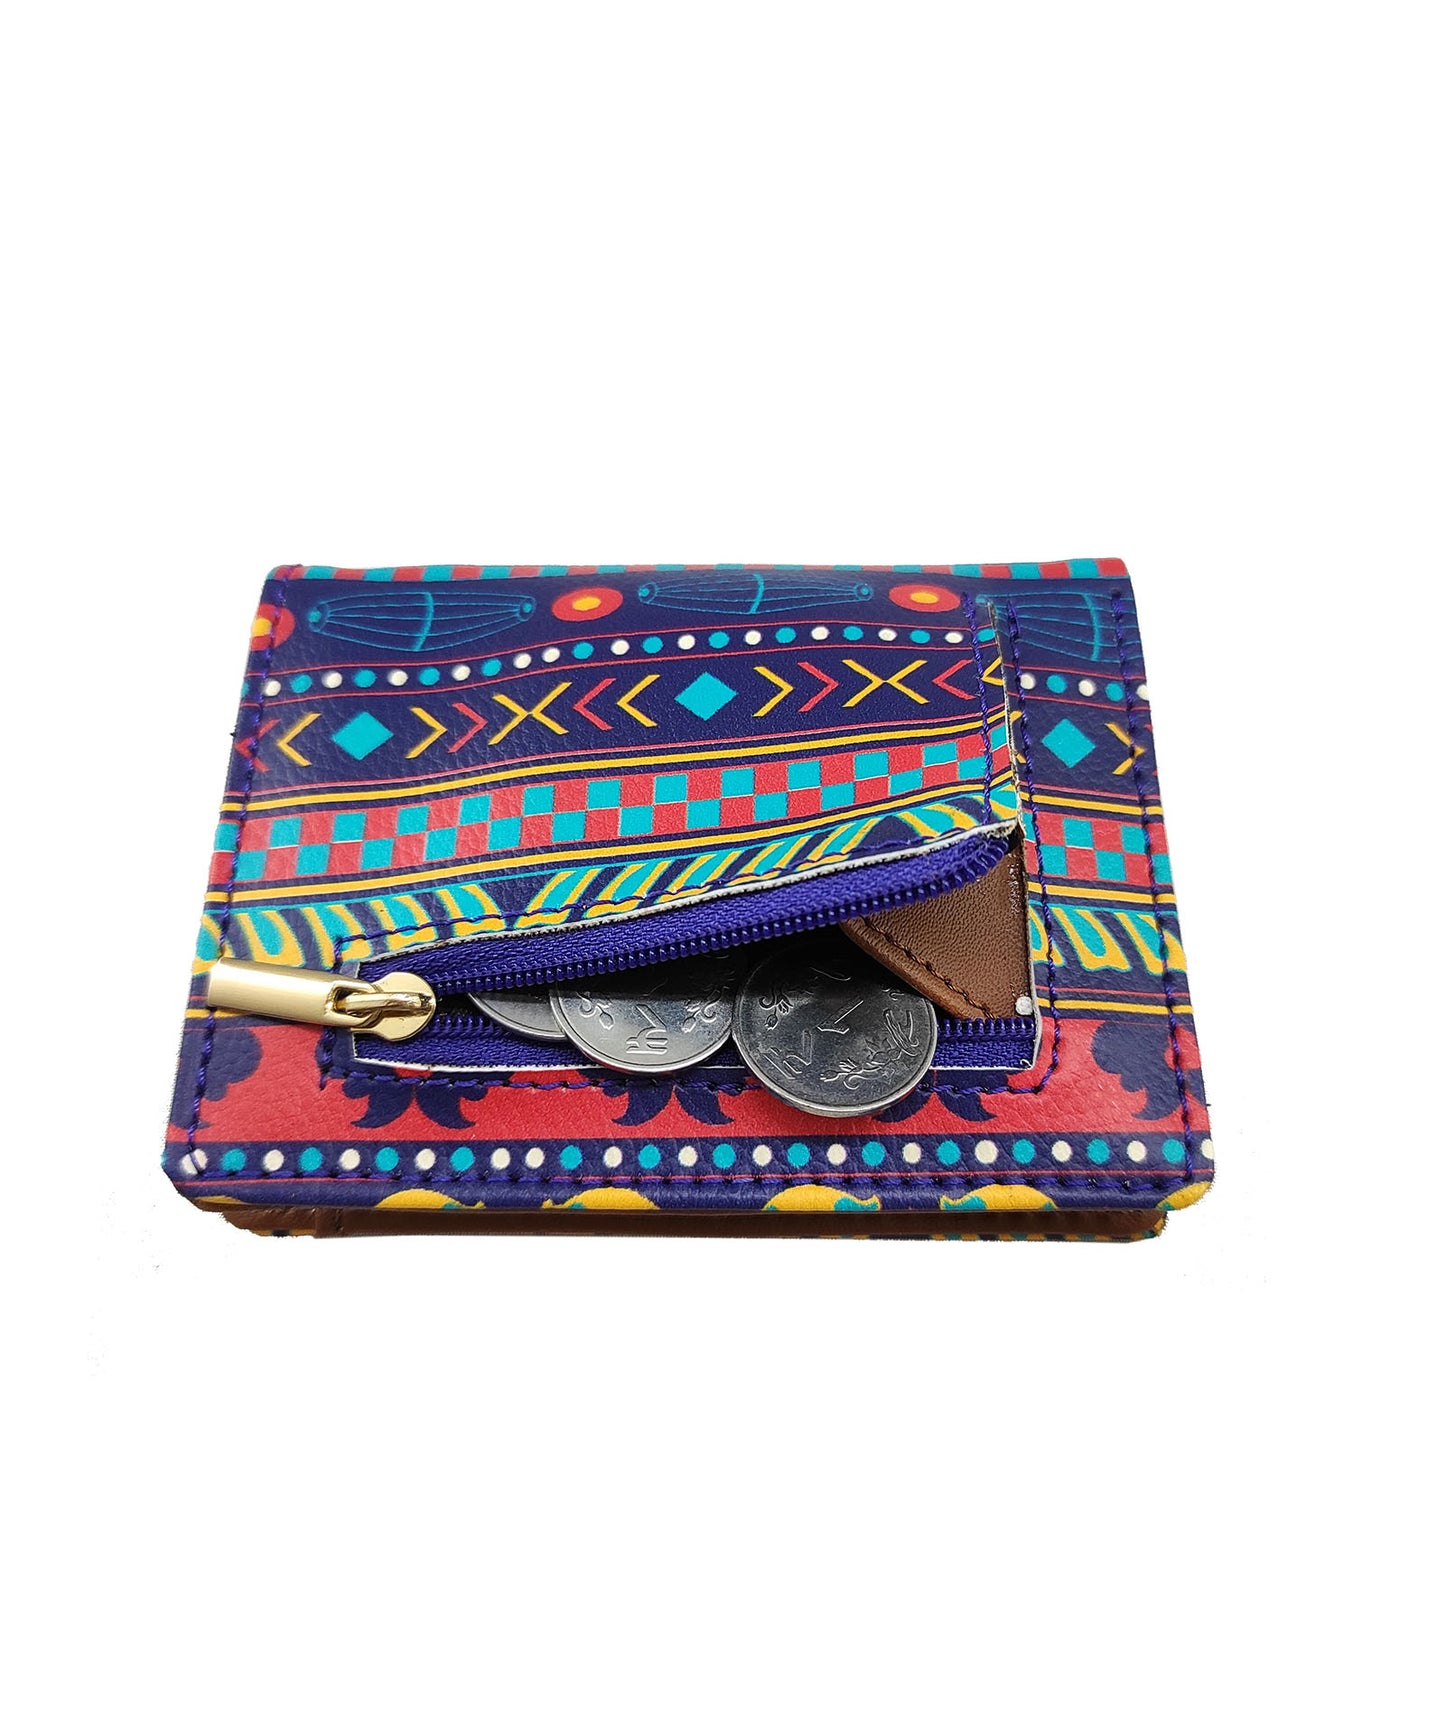 Combo Offers : Music Wall Loop Navy & Pocket Music Bdr Wallet Multi